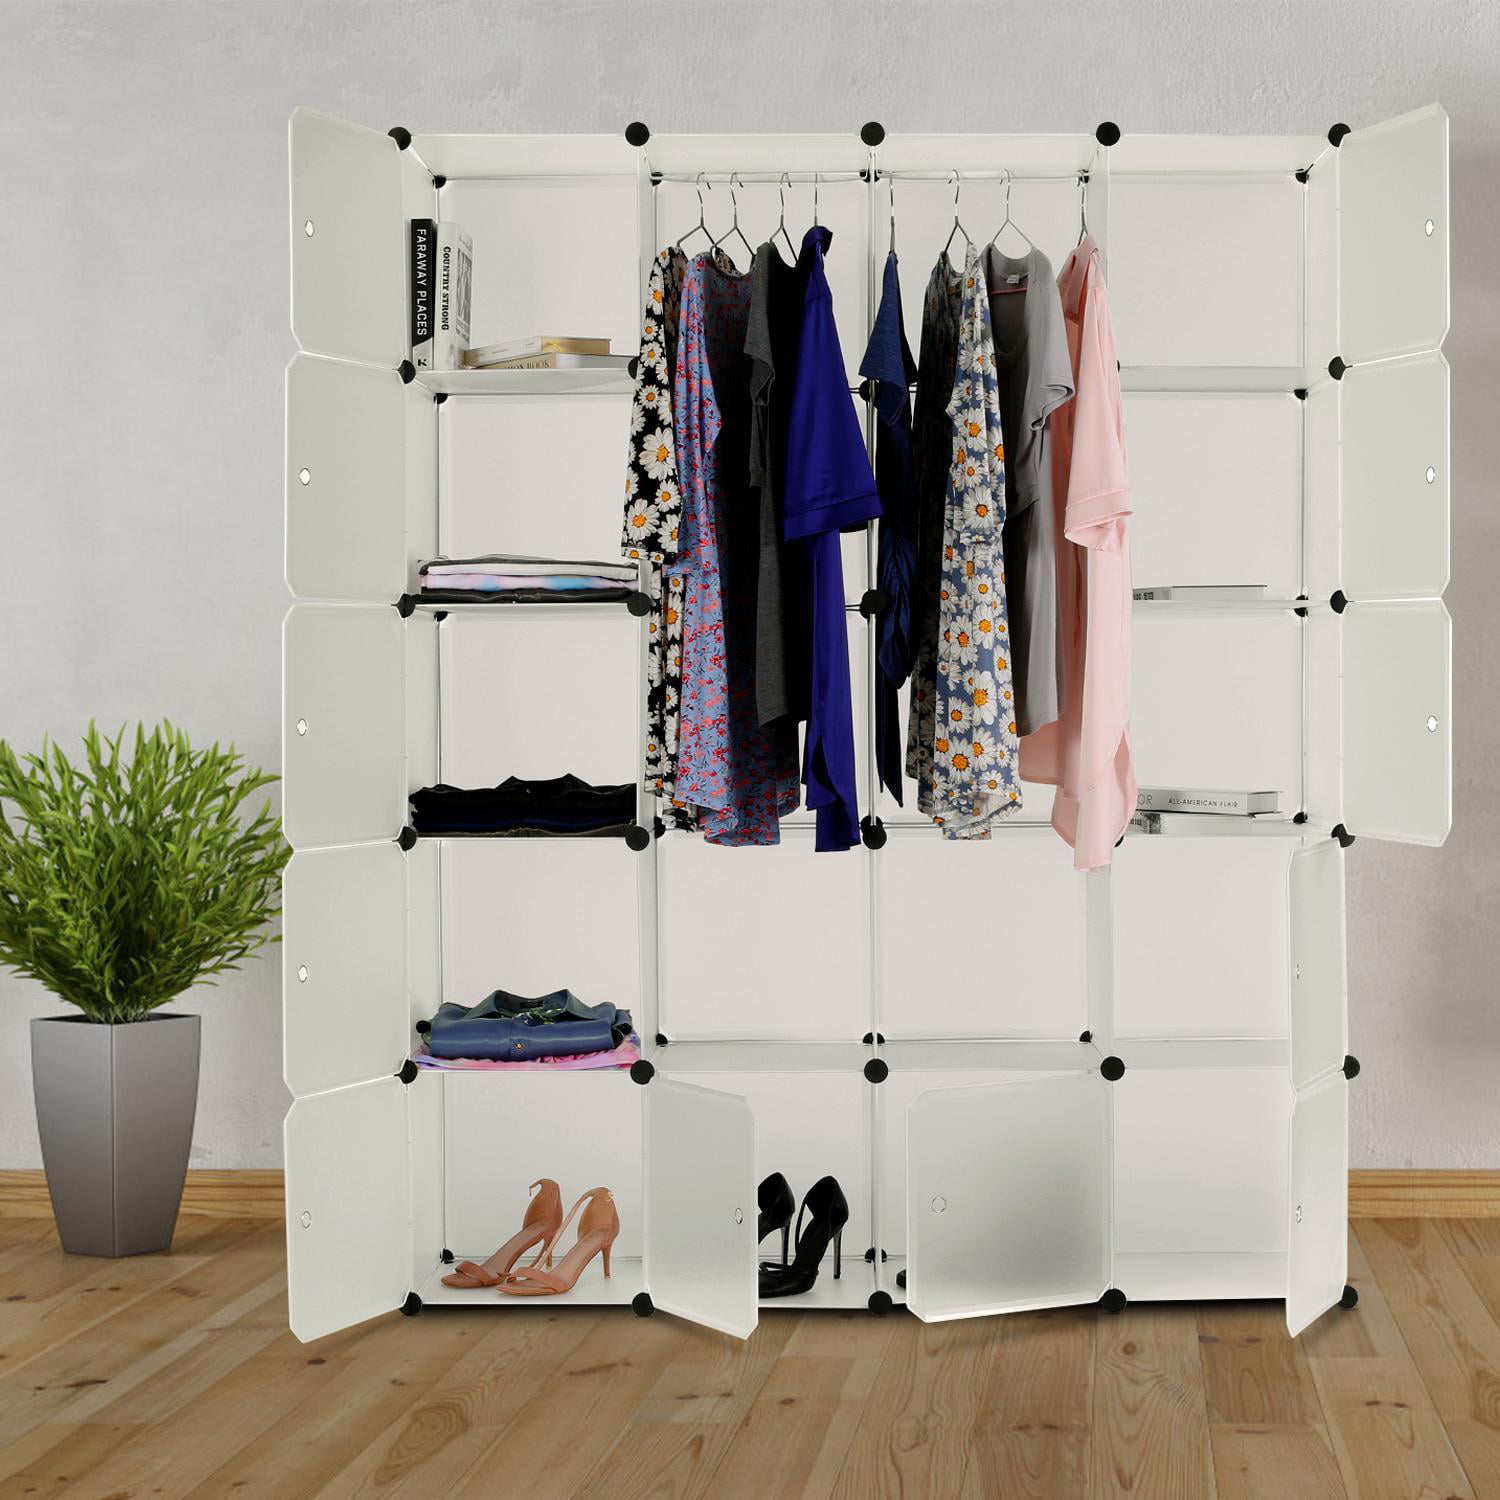 Onlibuy DIY 20-Cube Closet Portable Clothing&amp;Bags&amp;Shoes Wardrobe Storage Organizer For Bedroom/ Dormitory/Office